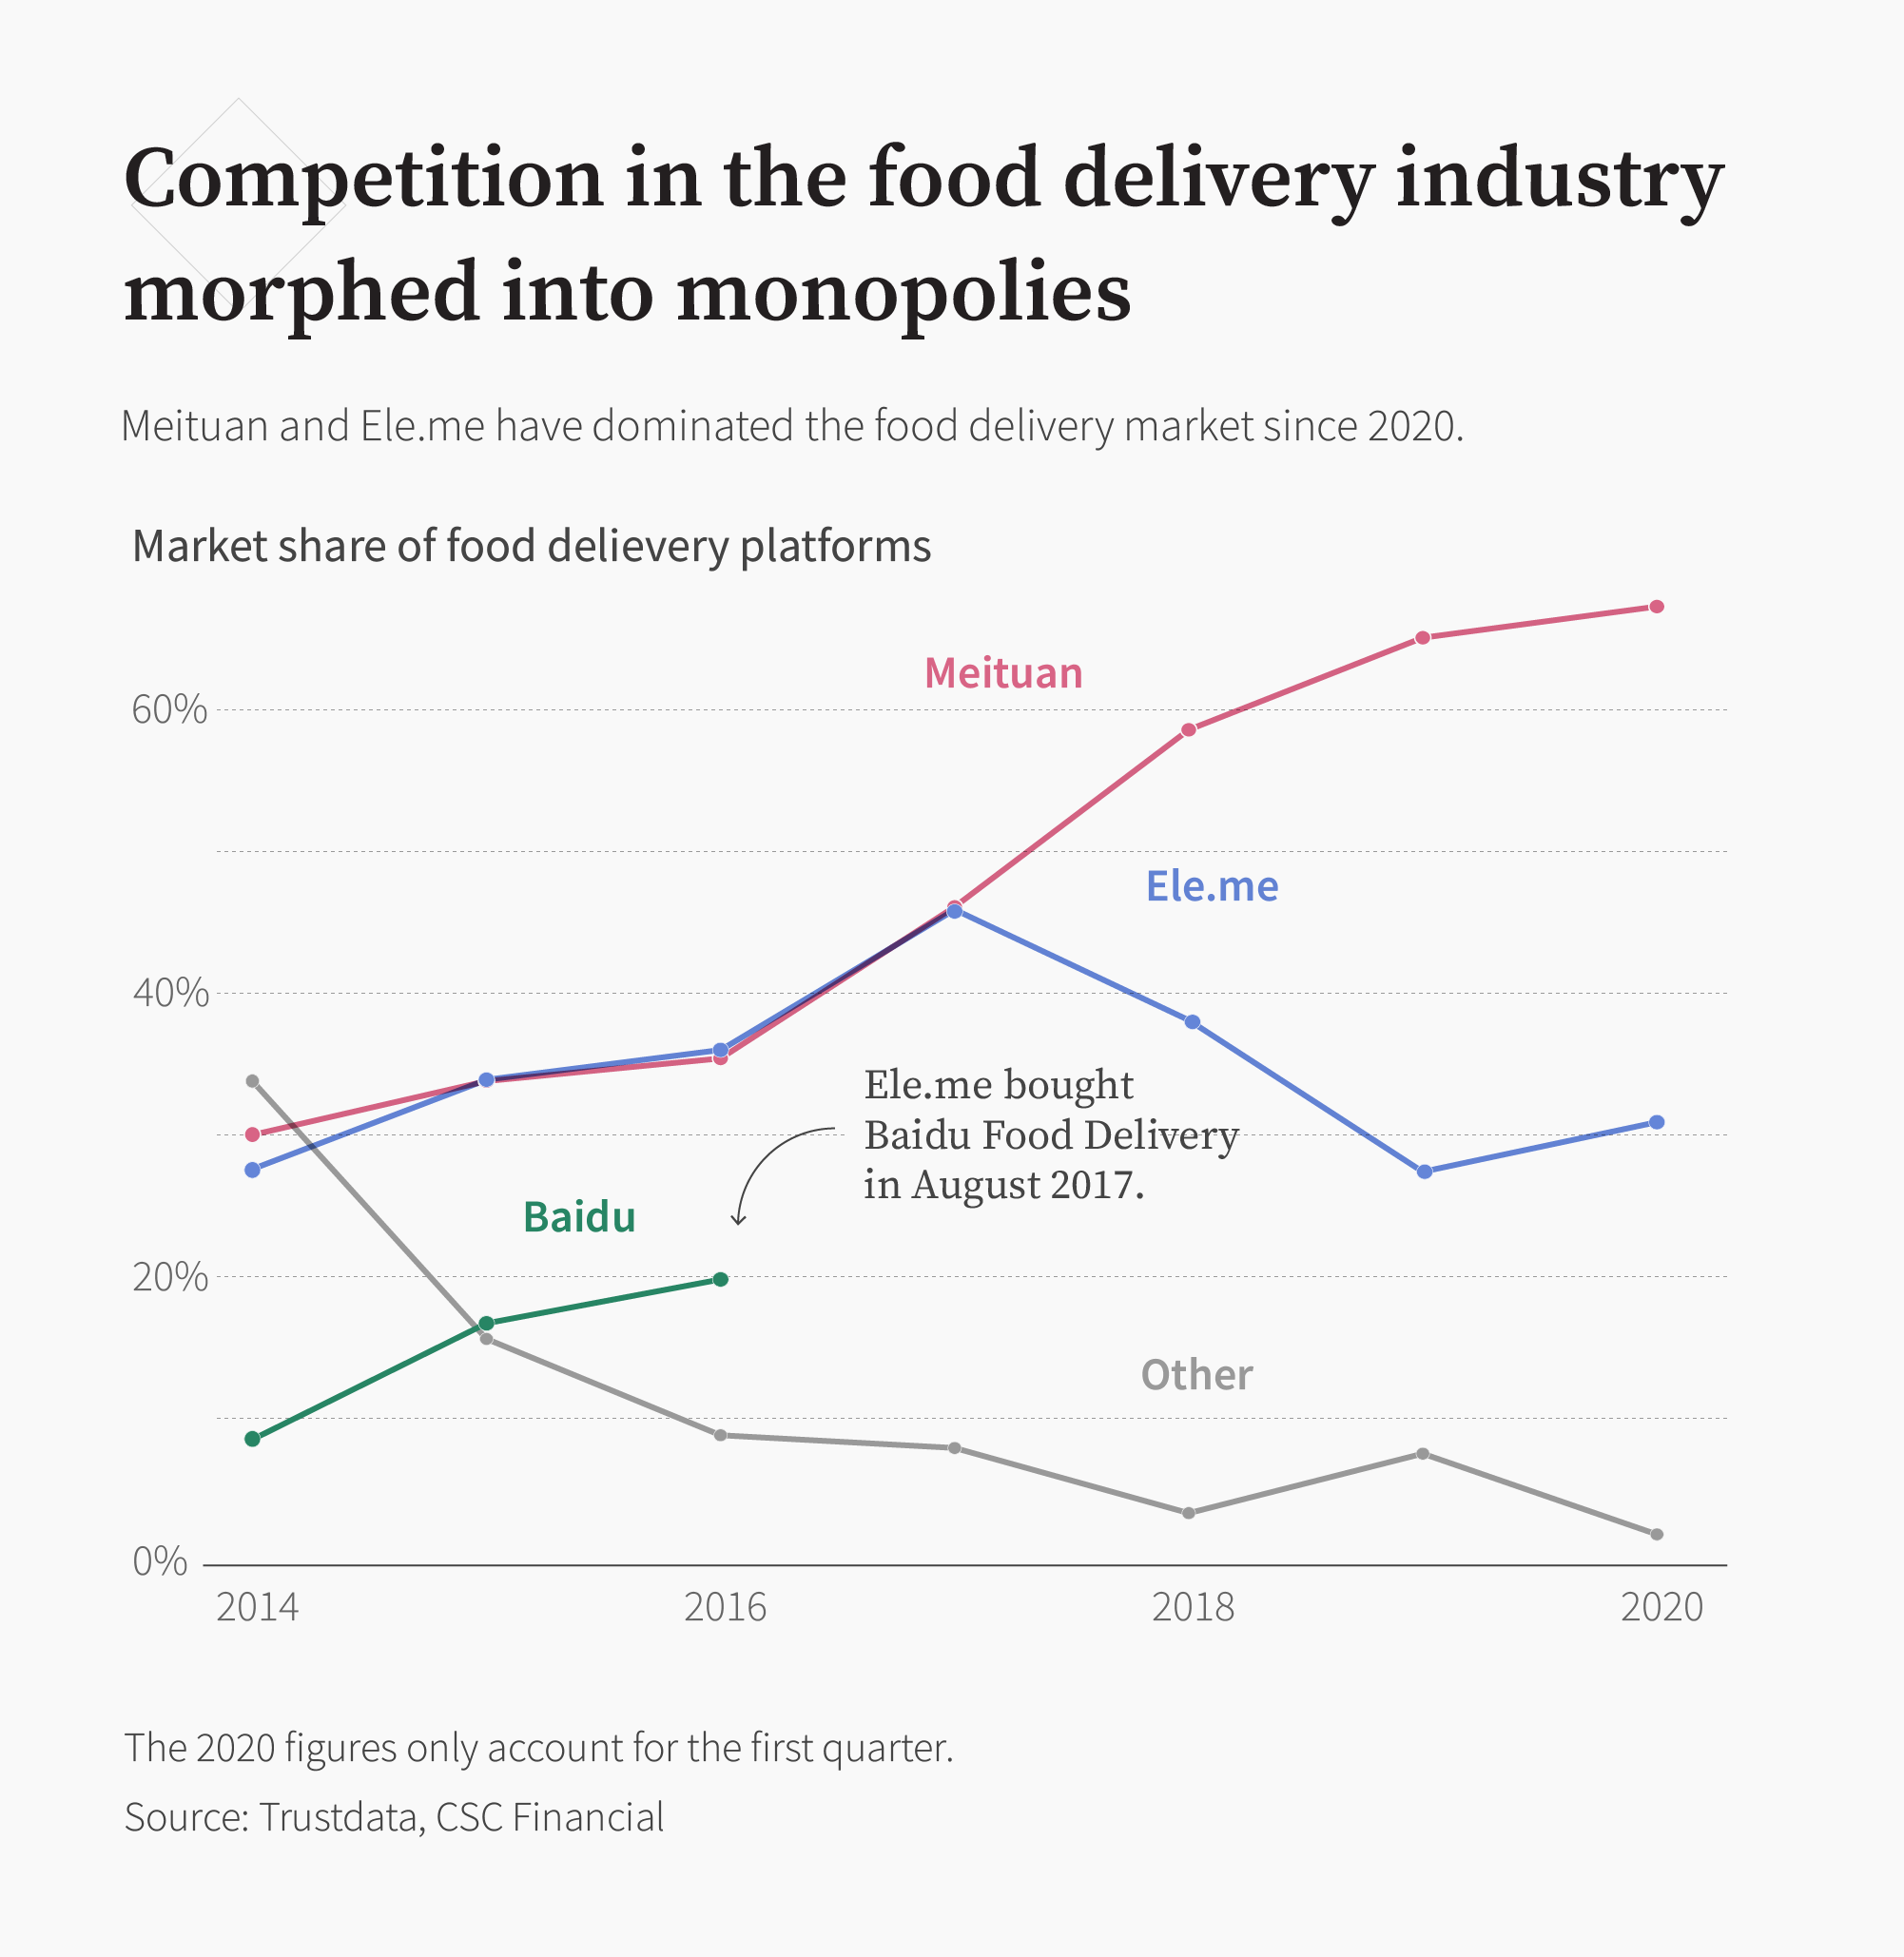 A CLB line graph shoes market share of food delivery platforms in China between 2014 and 2020